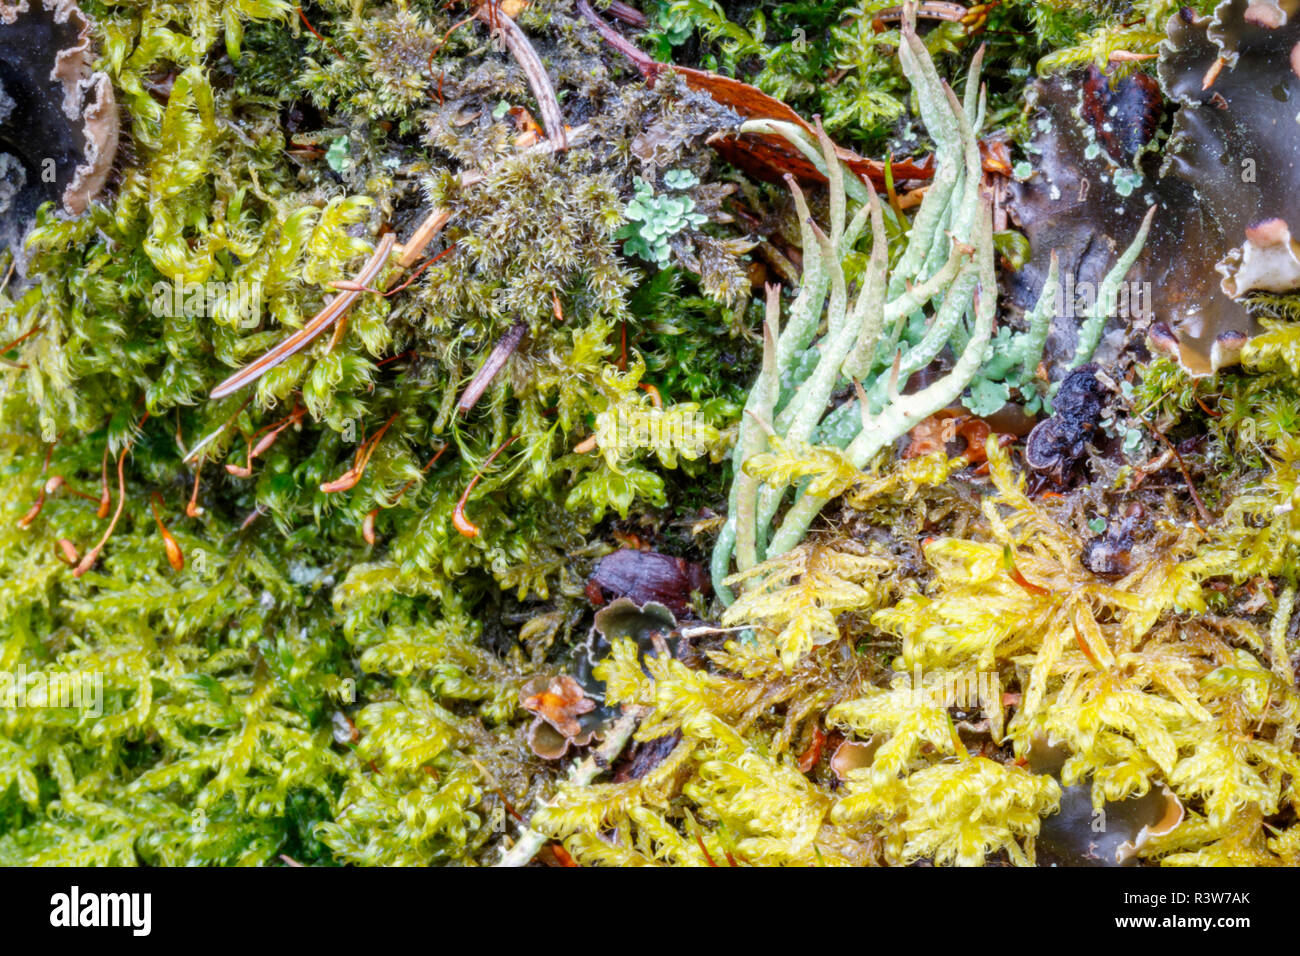 USA, Alaska. Close-up of a variety of lichen and moss. Stock Photo